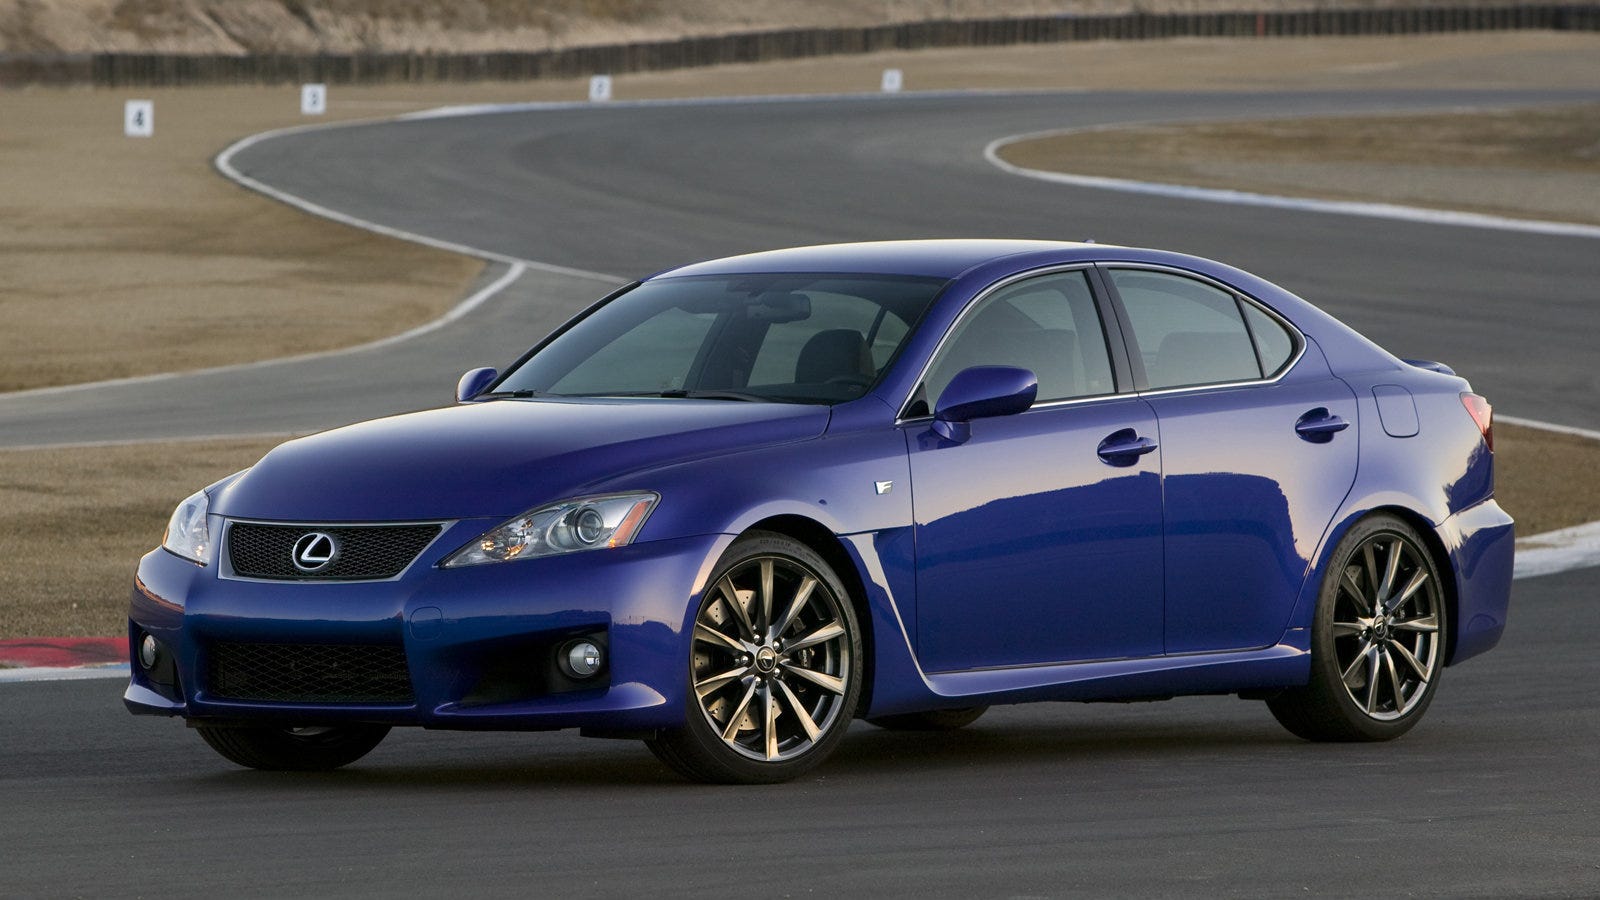 It's Time To Make A Case For The Lexus IS F